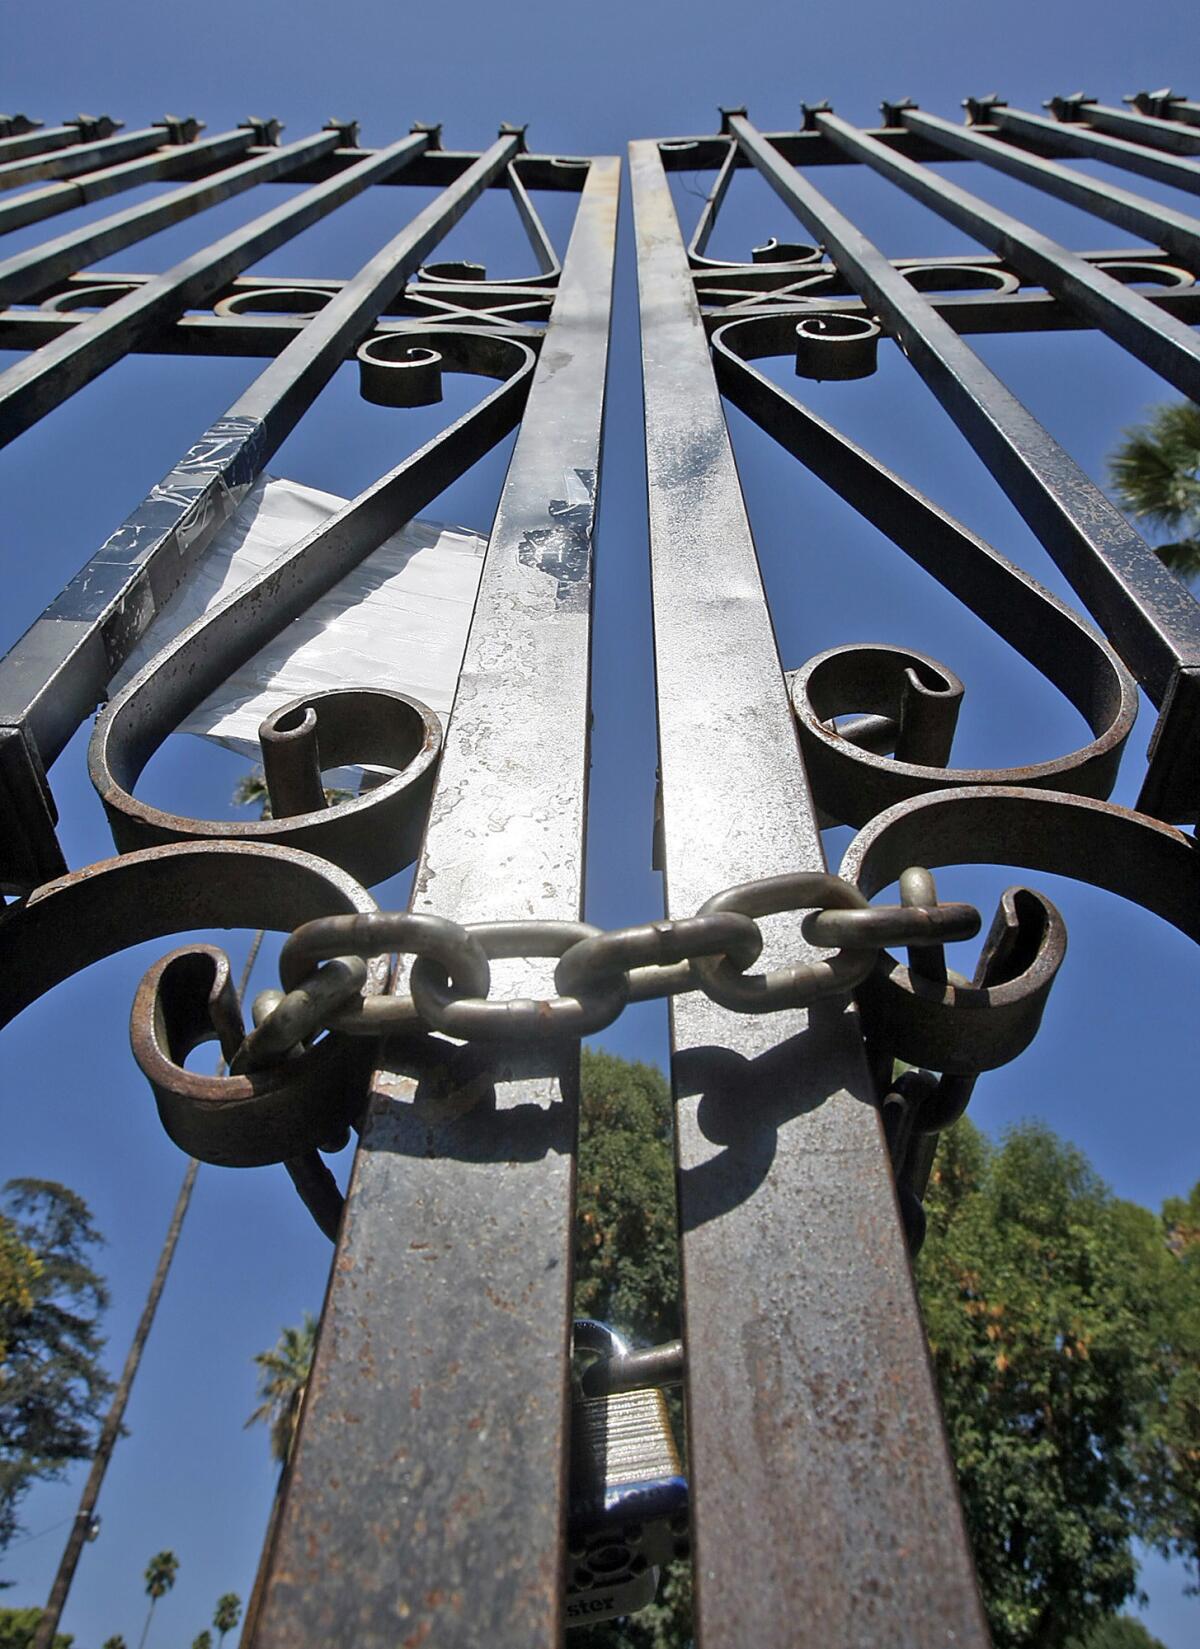 A new lock is in place on the gates at Grand View Memorial Park following a break in